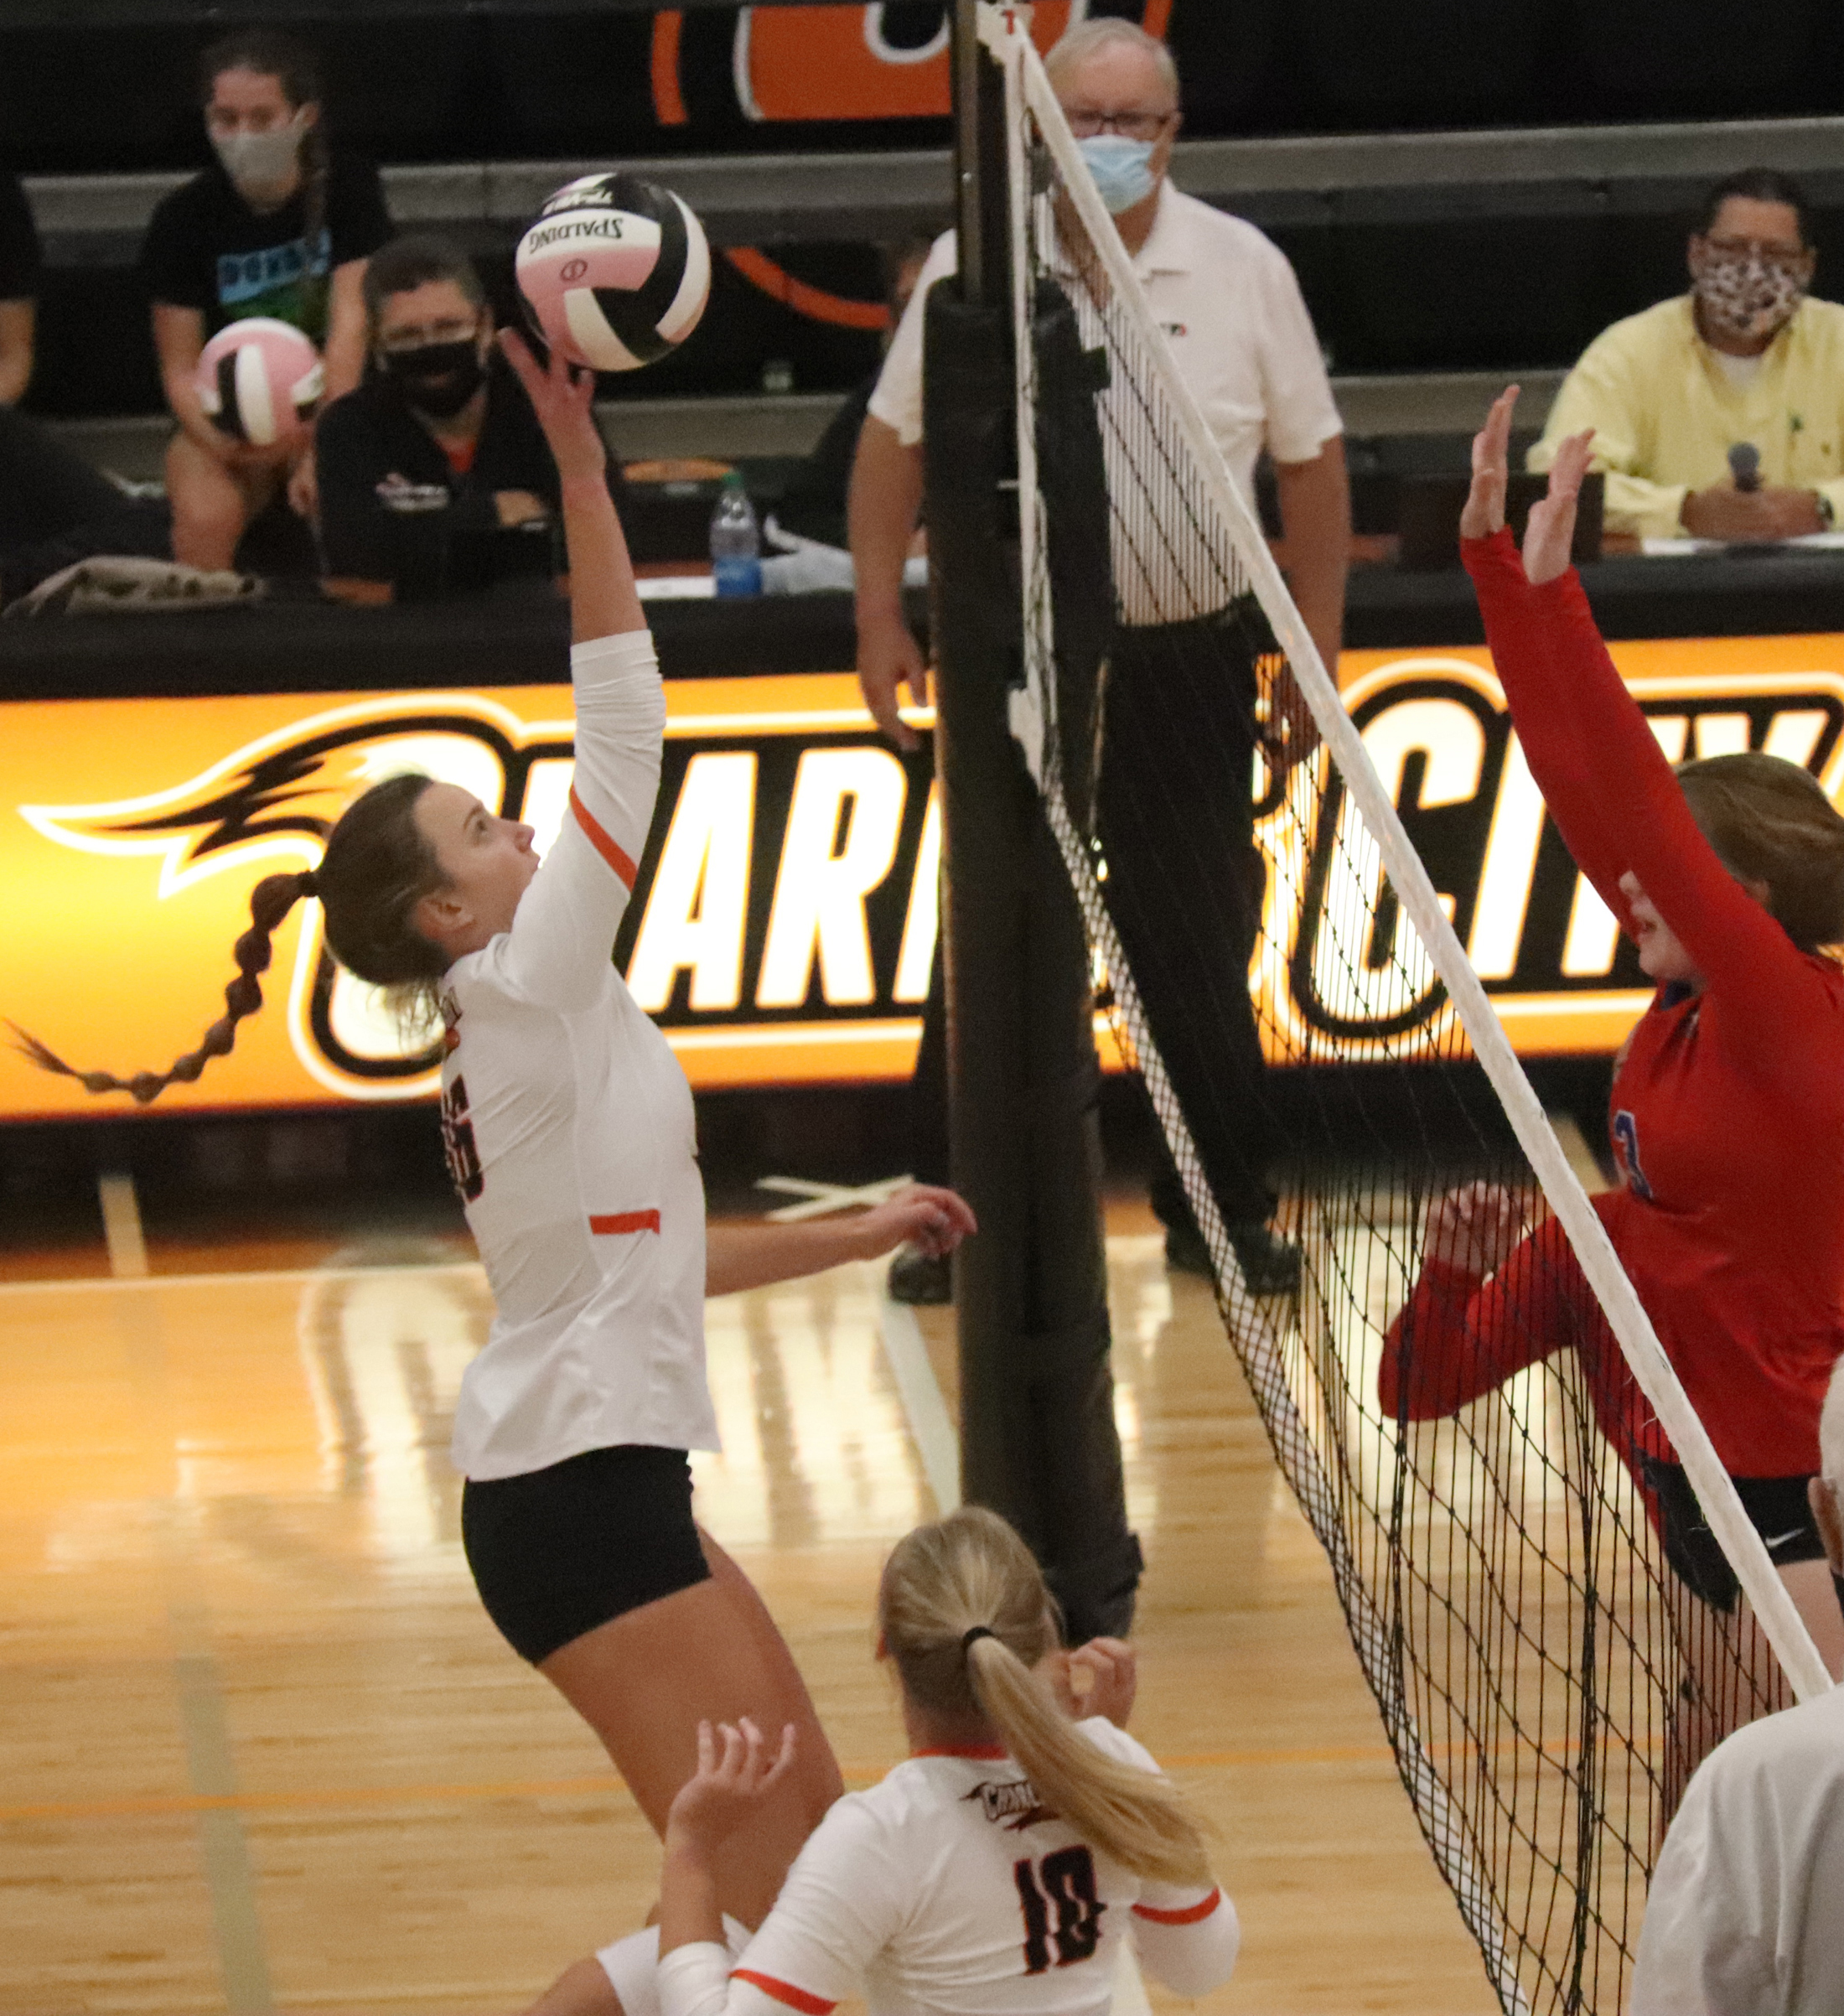 Danielle Stock named to All-Northeast Iowa Conference Volleyball First Team